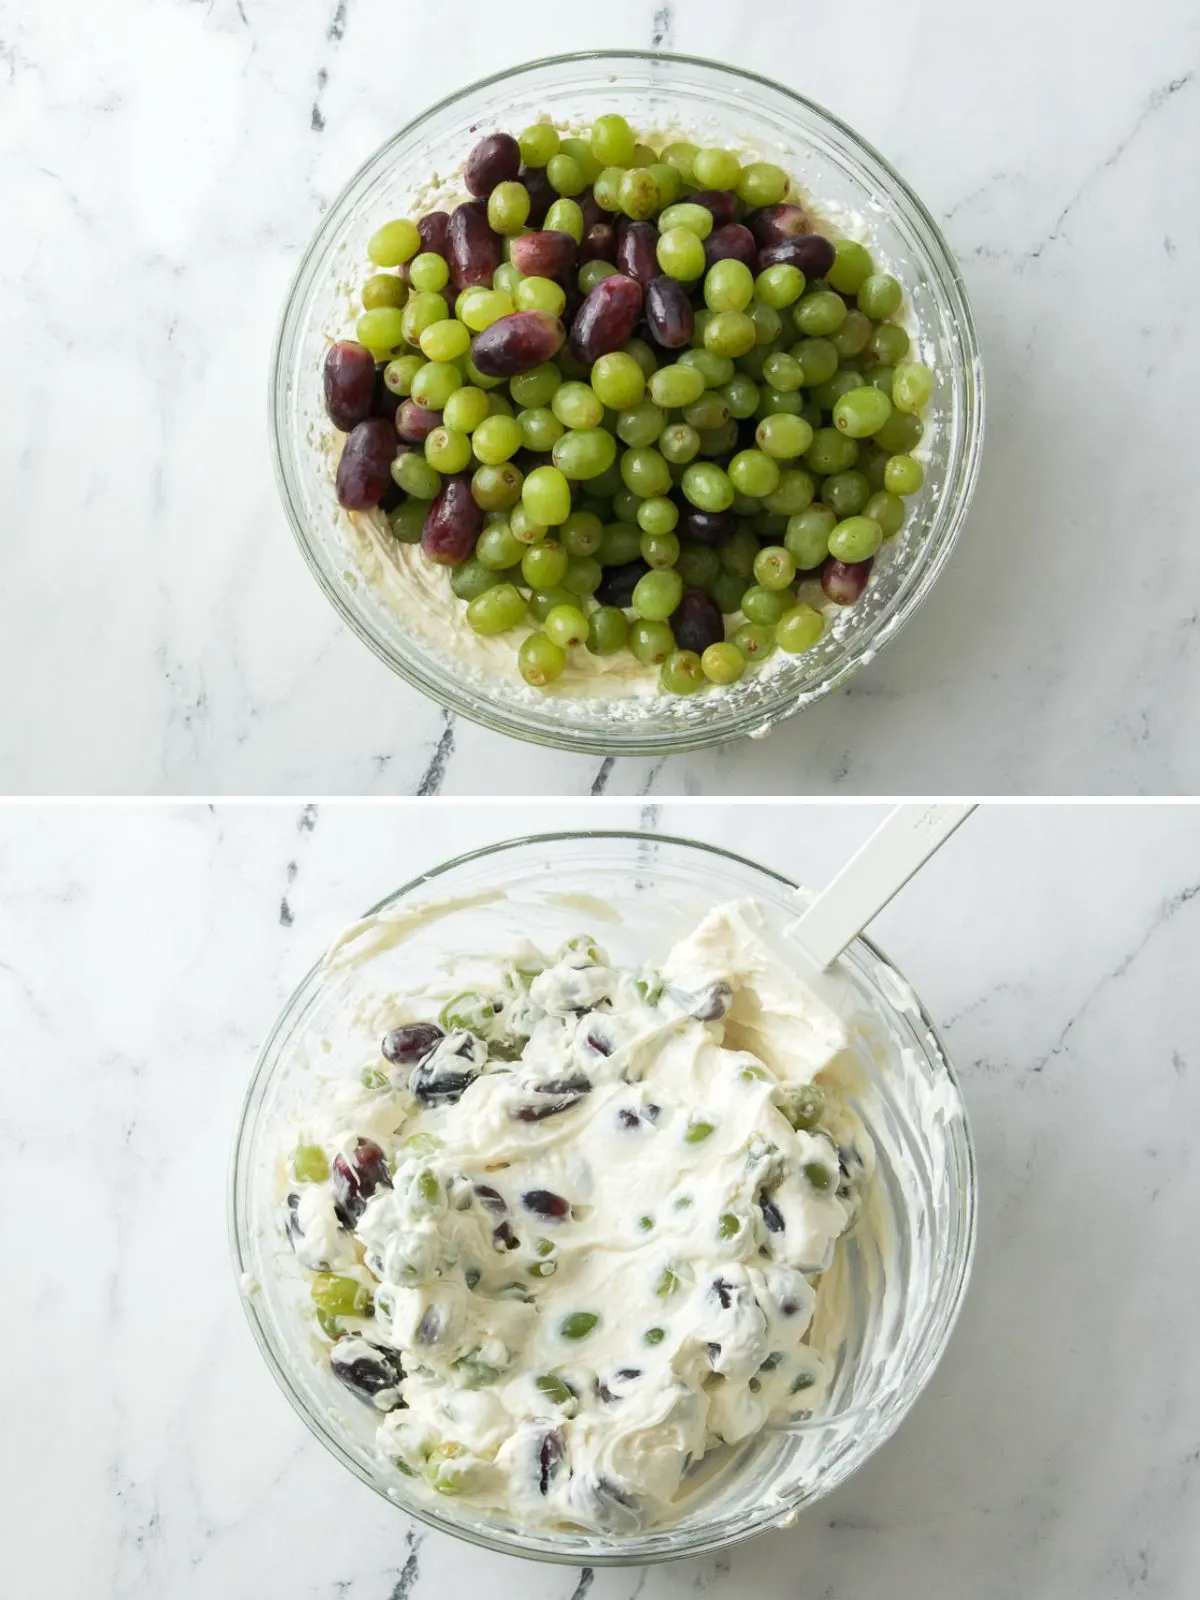 Collage of 2 pictures showing mixing of grapes with cream cheese dressing